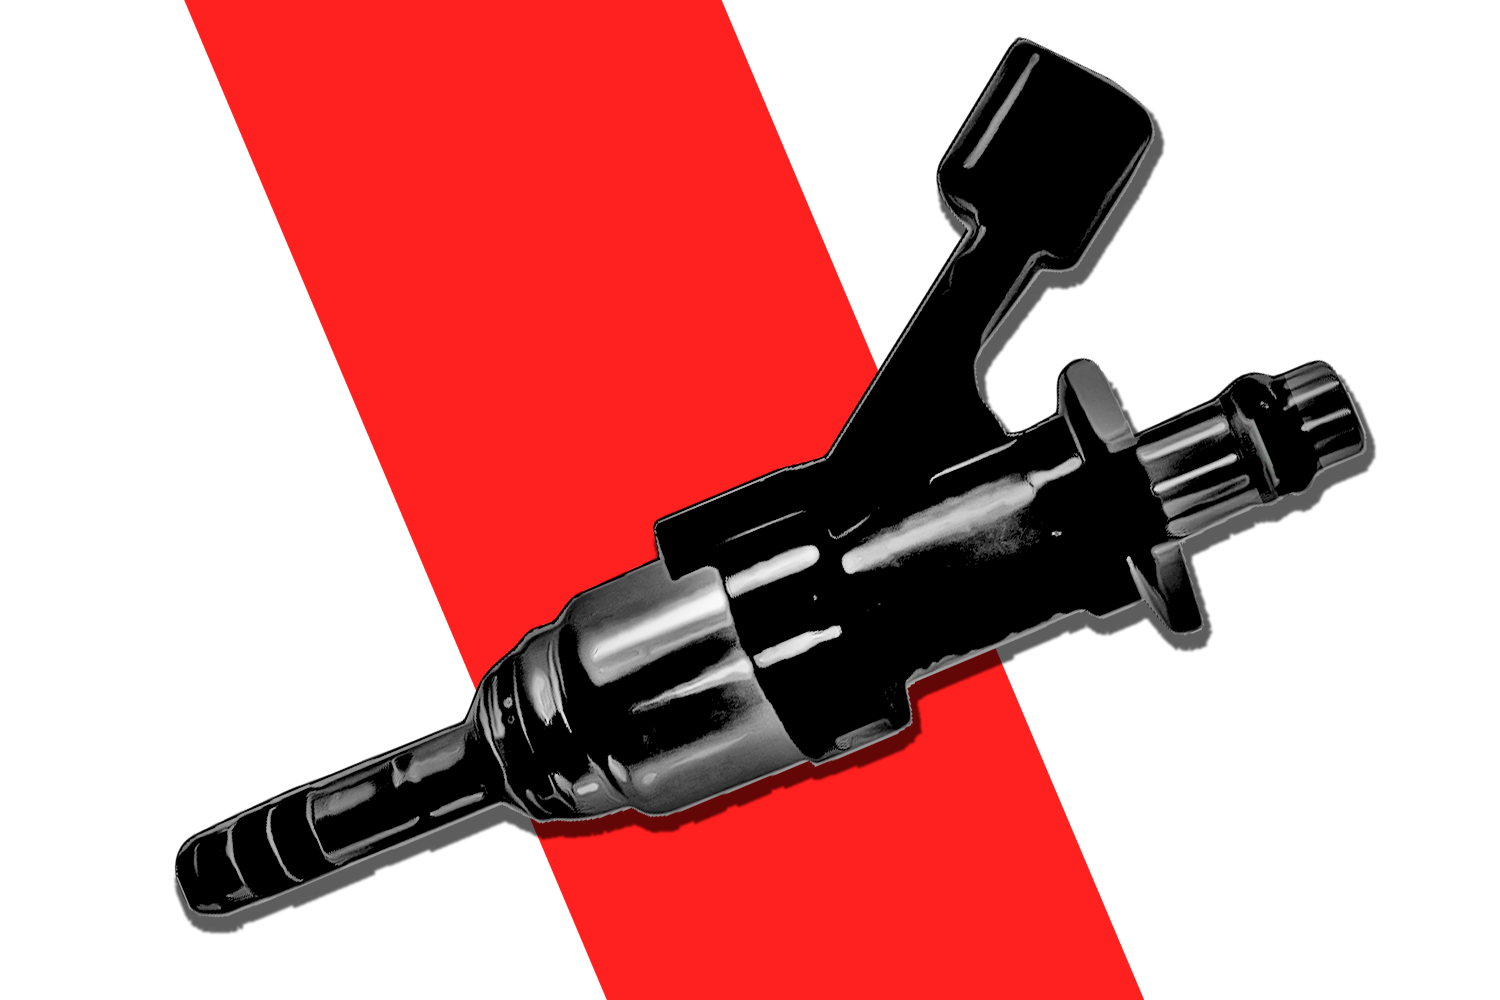 GDI Fuel Injectors - Available on InjectorExperts.com